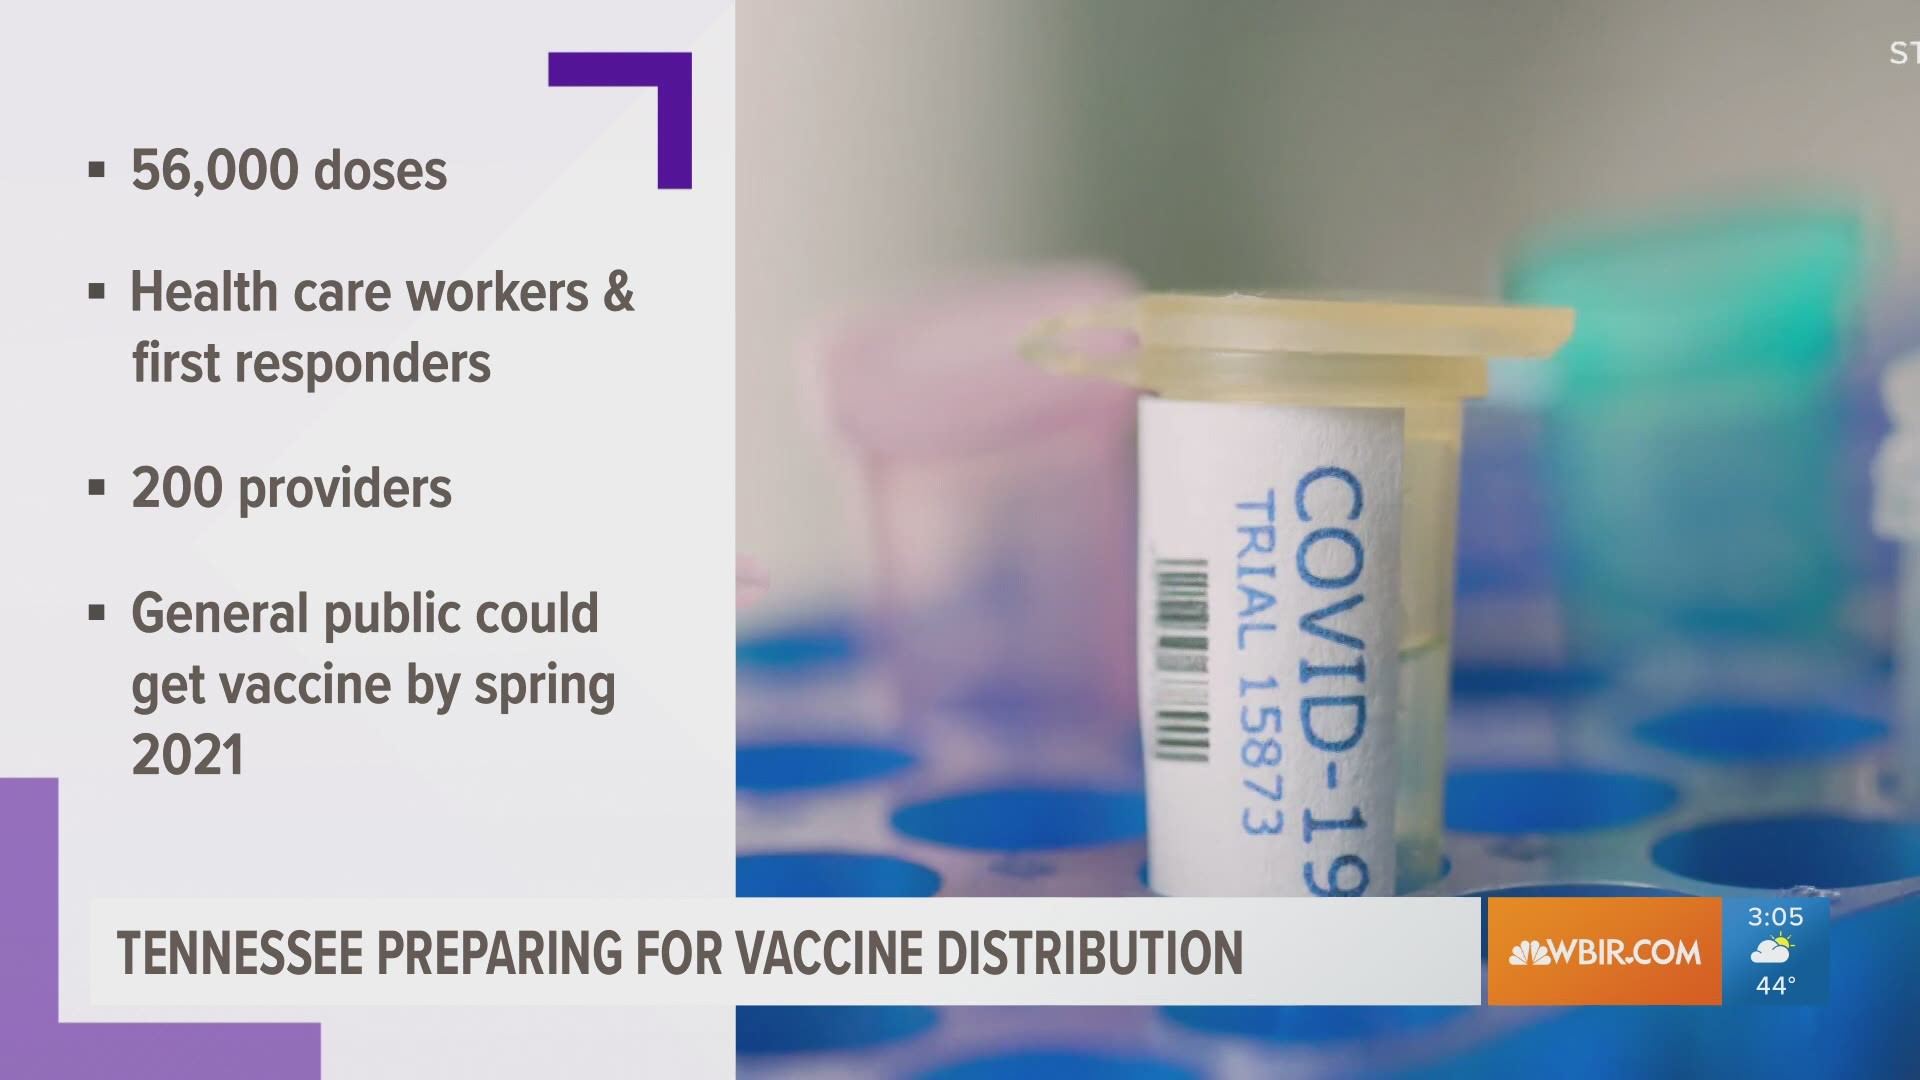 The state has said health care workers and first responders will get the vaccines first. There are more than 200 providers that can administer the vaccine.